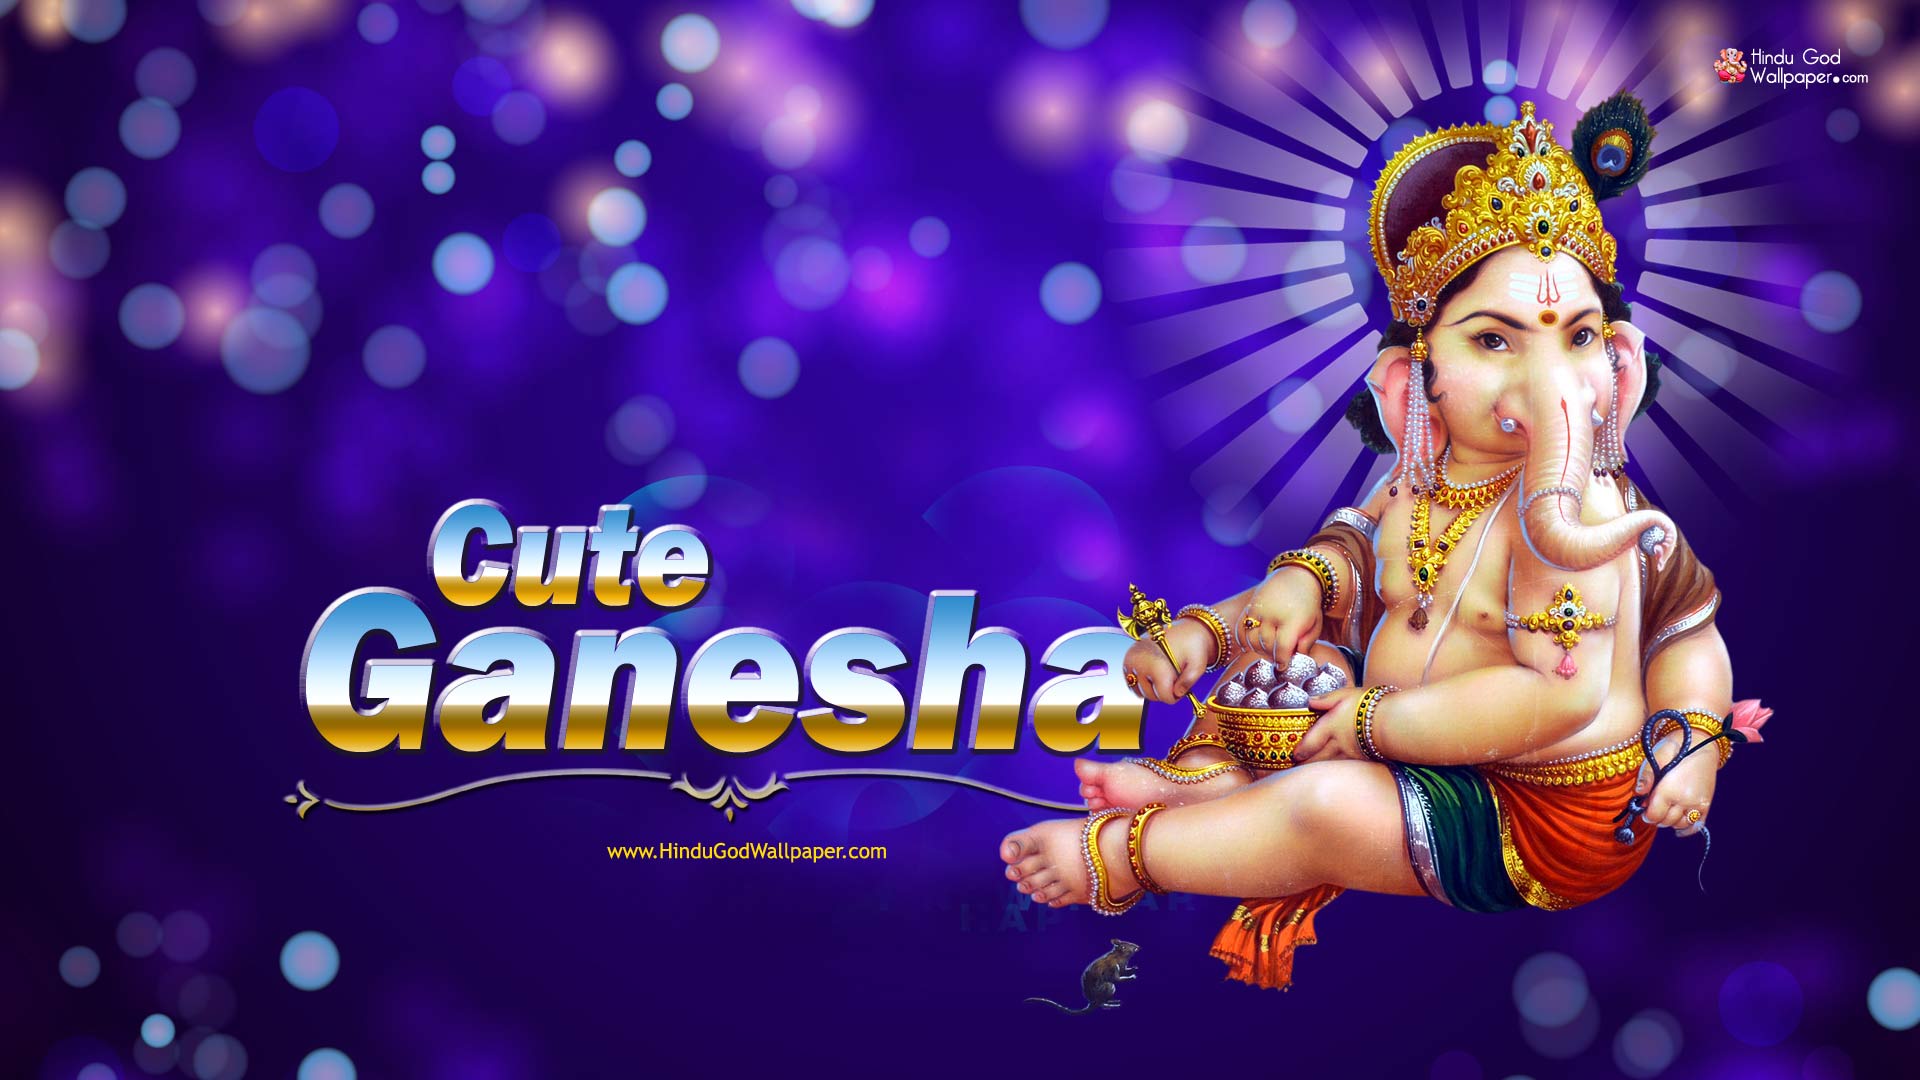 Cute Baby Ganesha Images HD Photos & Wallpapers Download